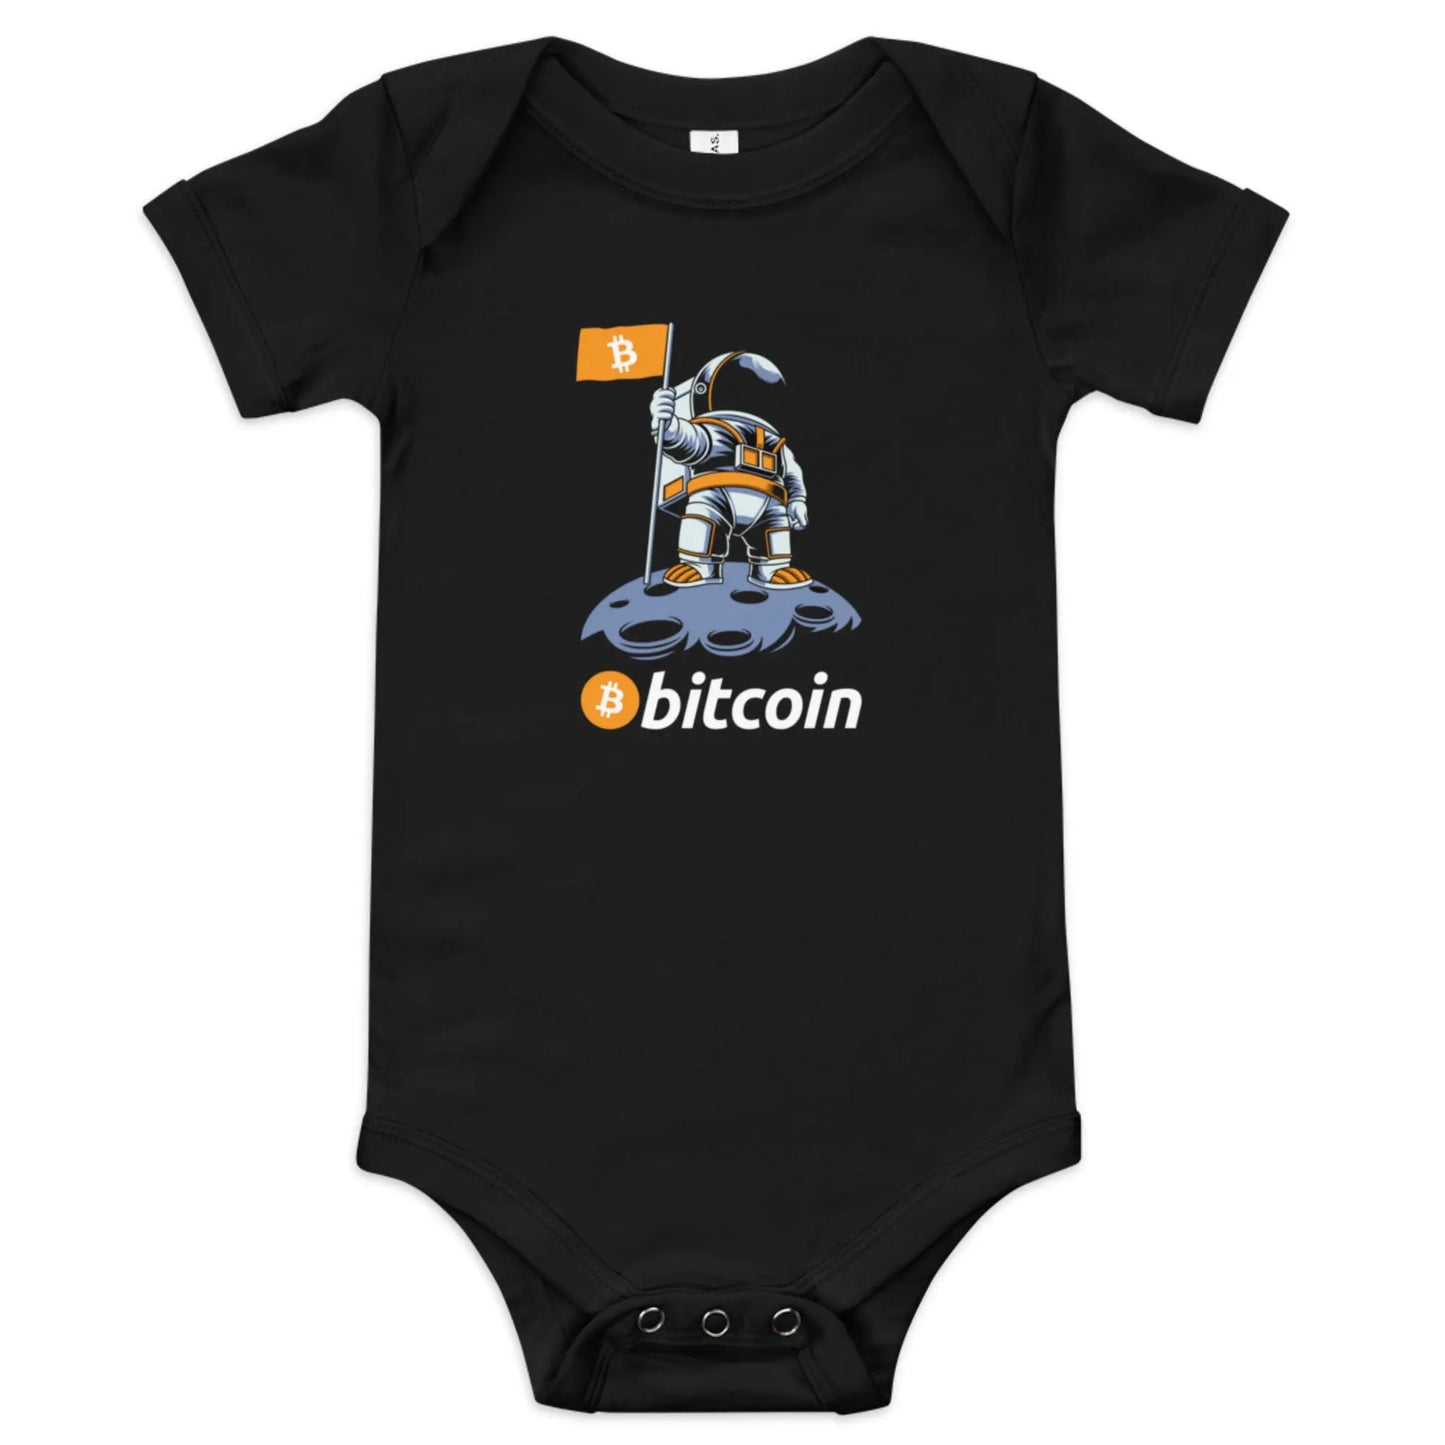 Bitcoin To The Moon - Baby Bitcoin Body Suit - One Piece with Short Sleeve Black